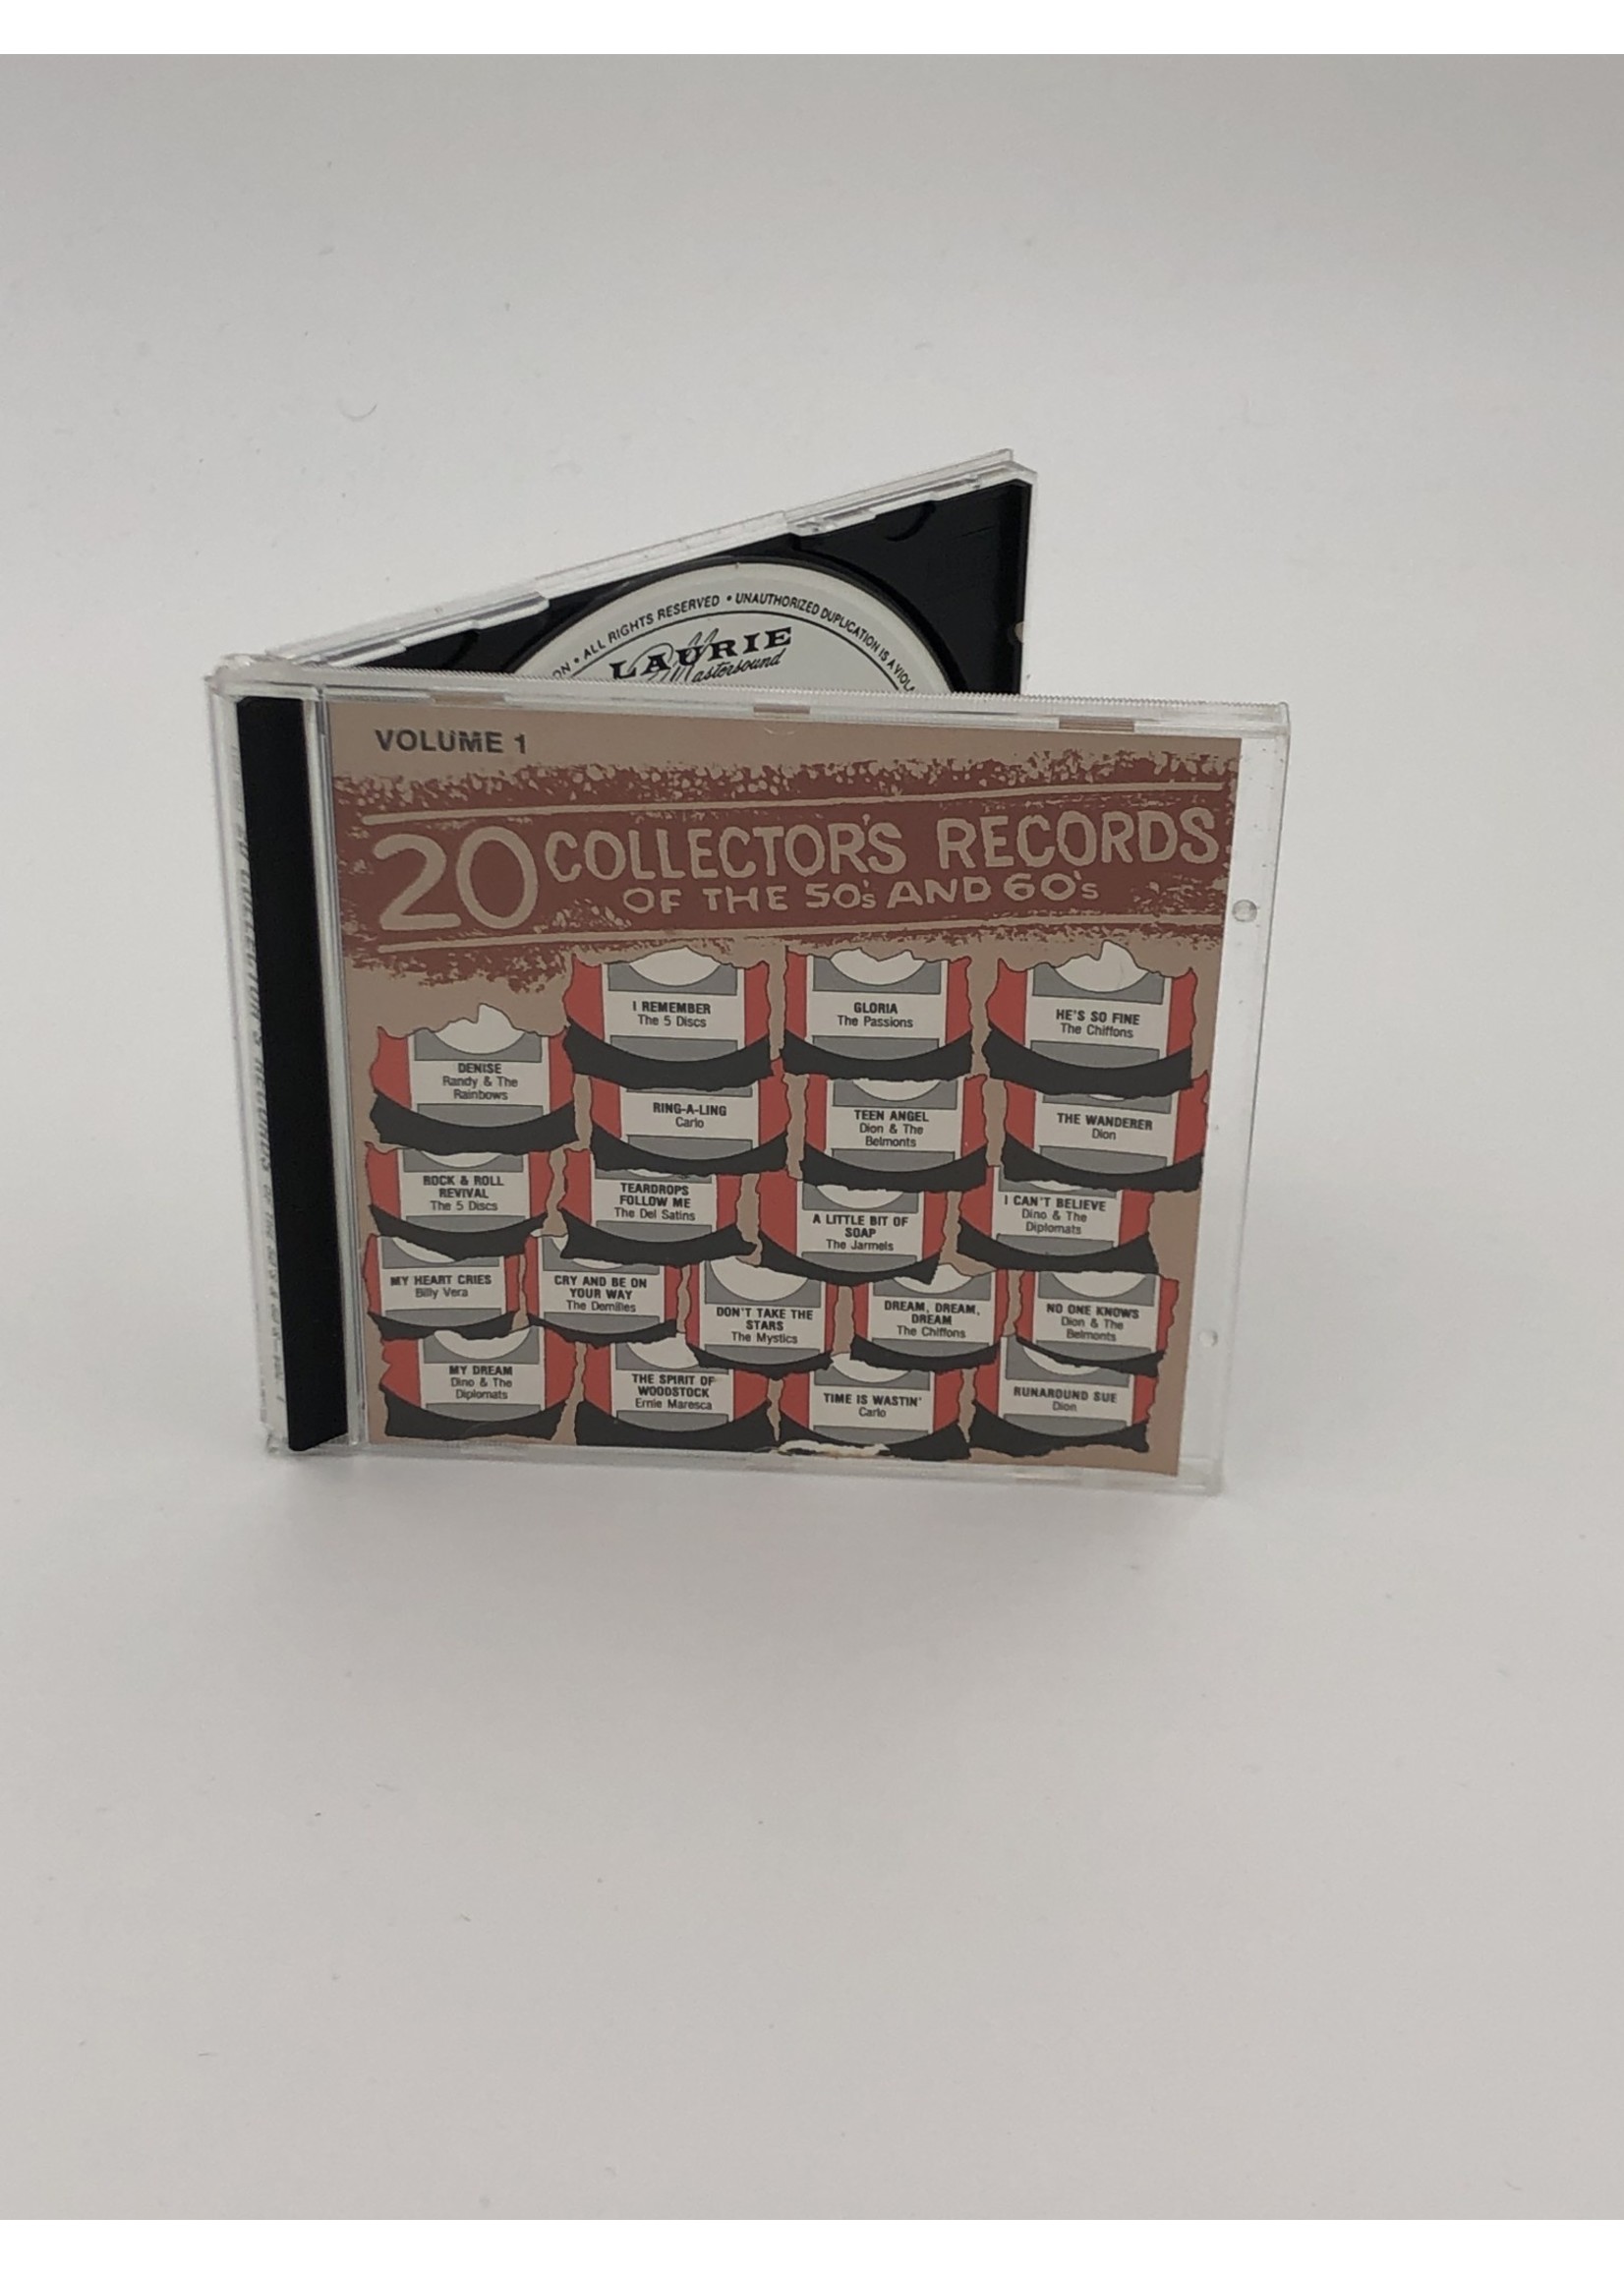 CD 20 Collectors Records of the 50s and 60s Volume 1CD